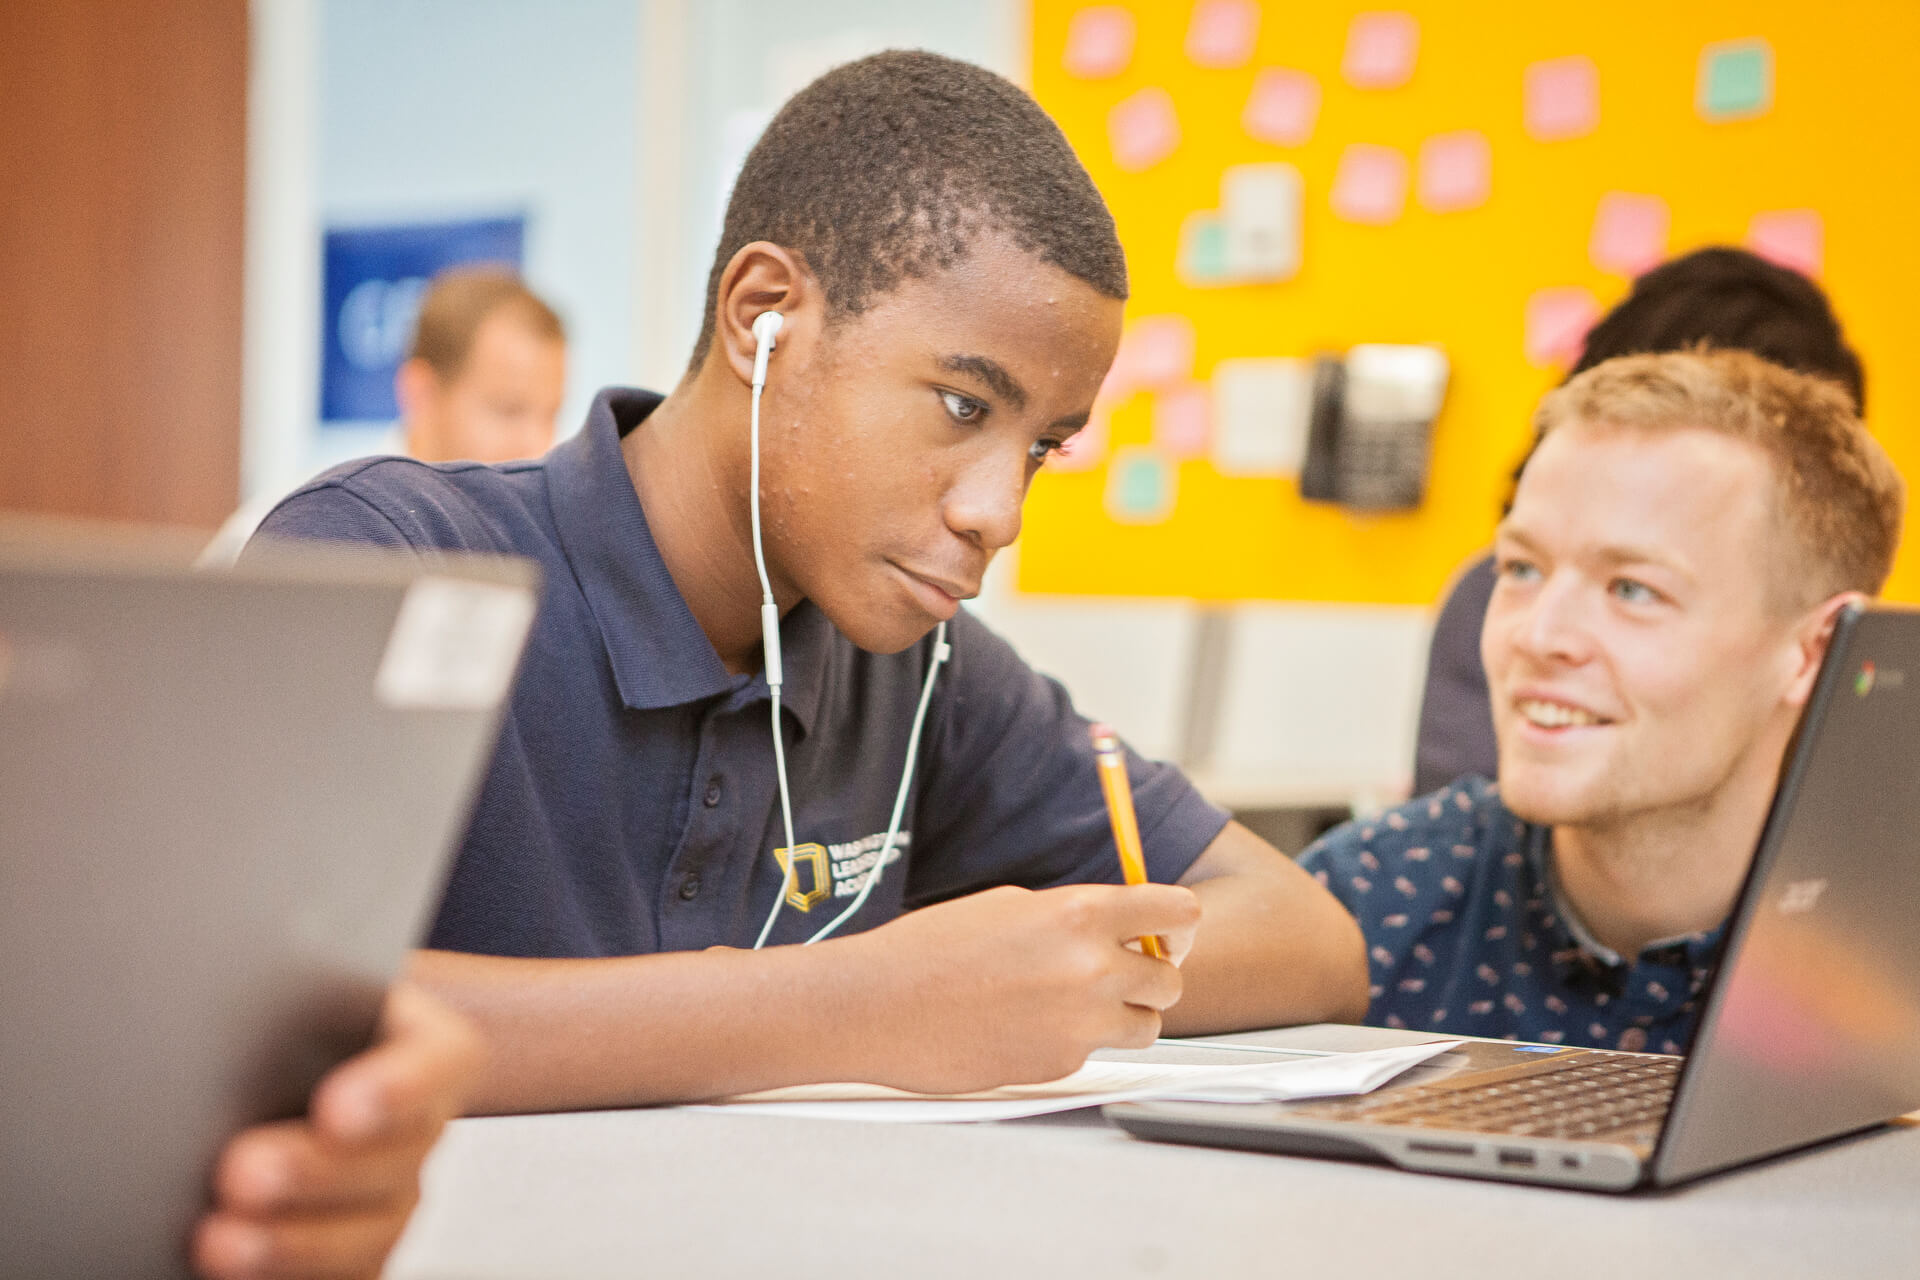 Student wearing headphones and taking notes in front of their computer with another student smiling in the background